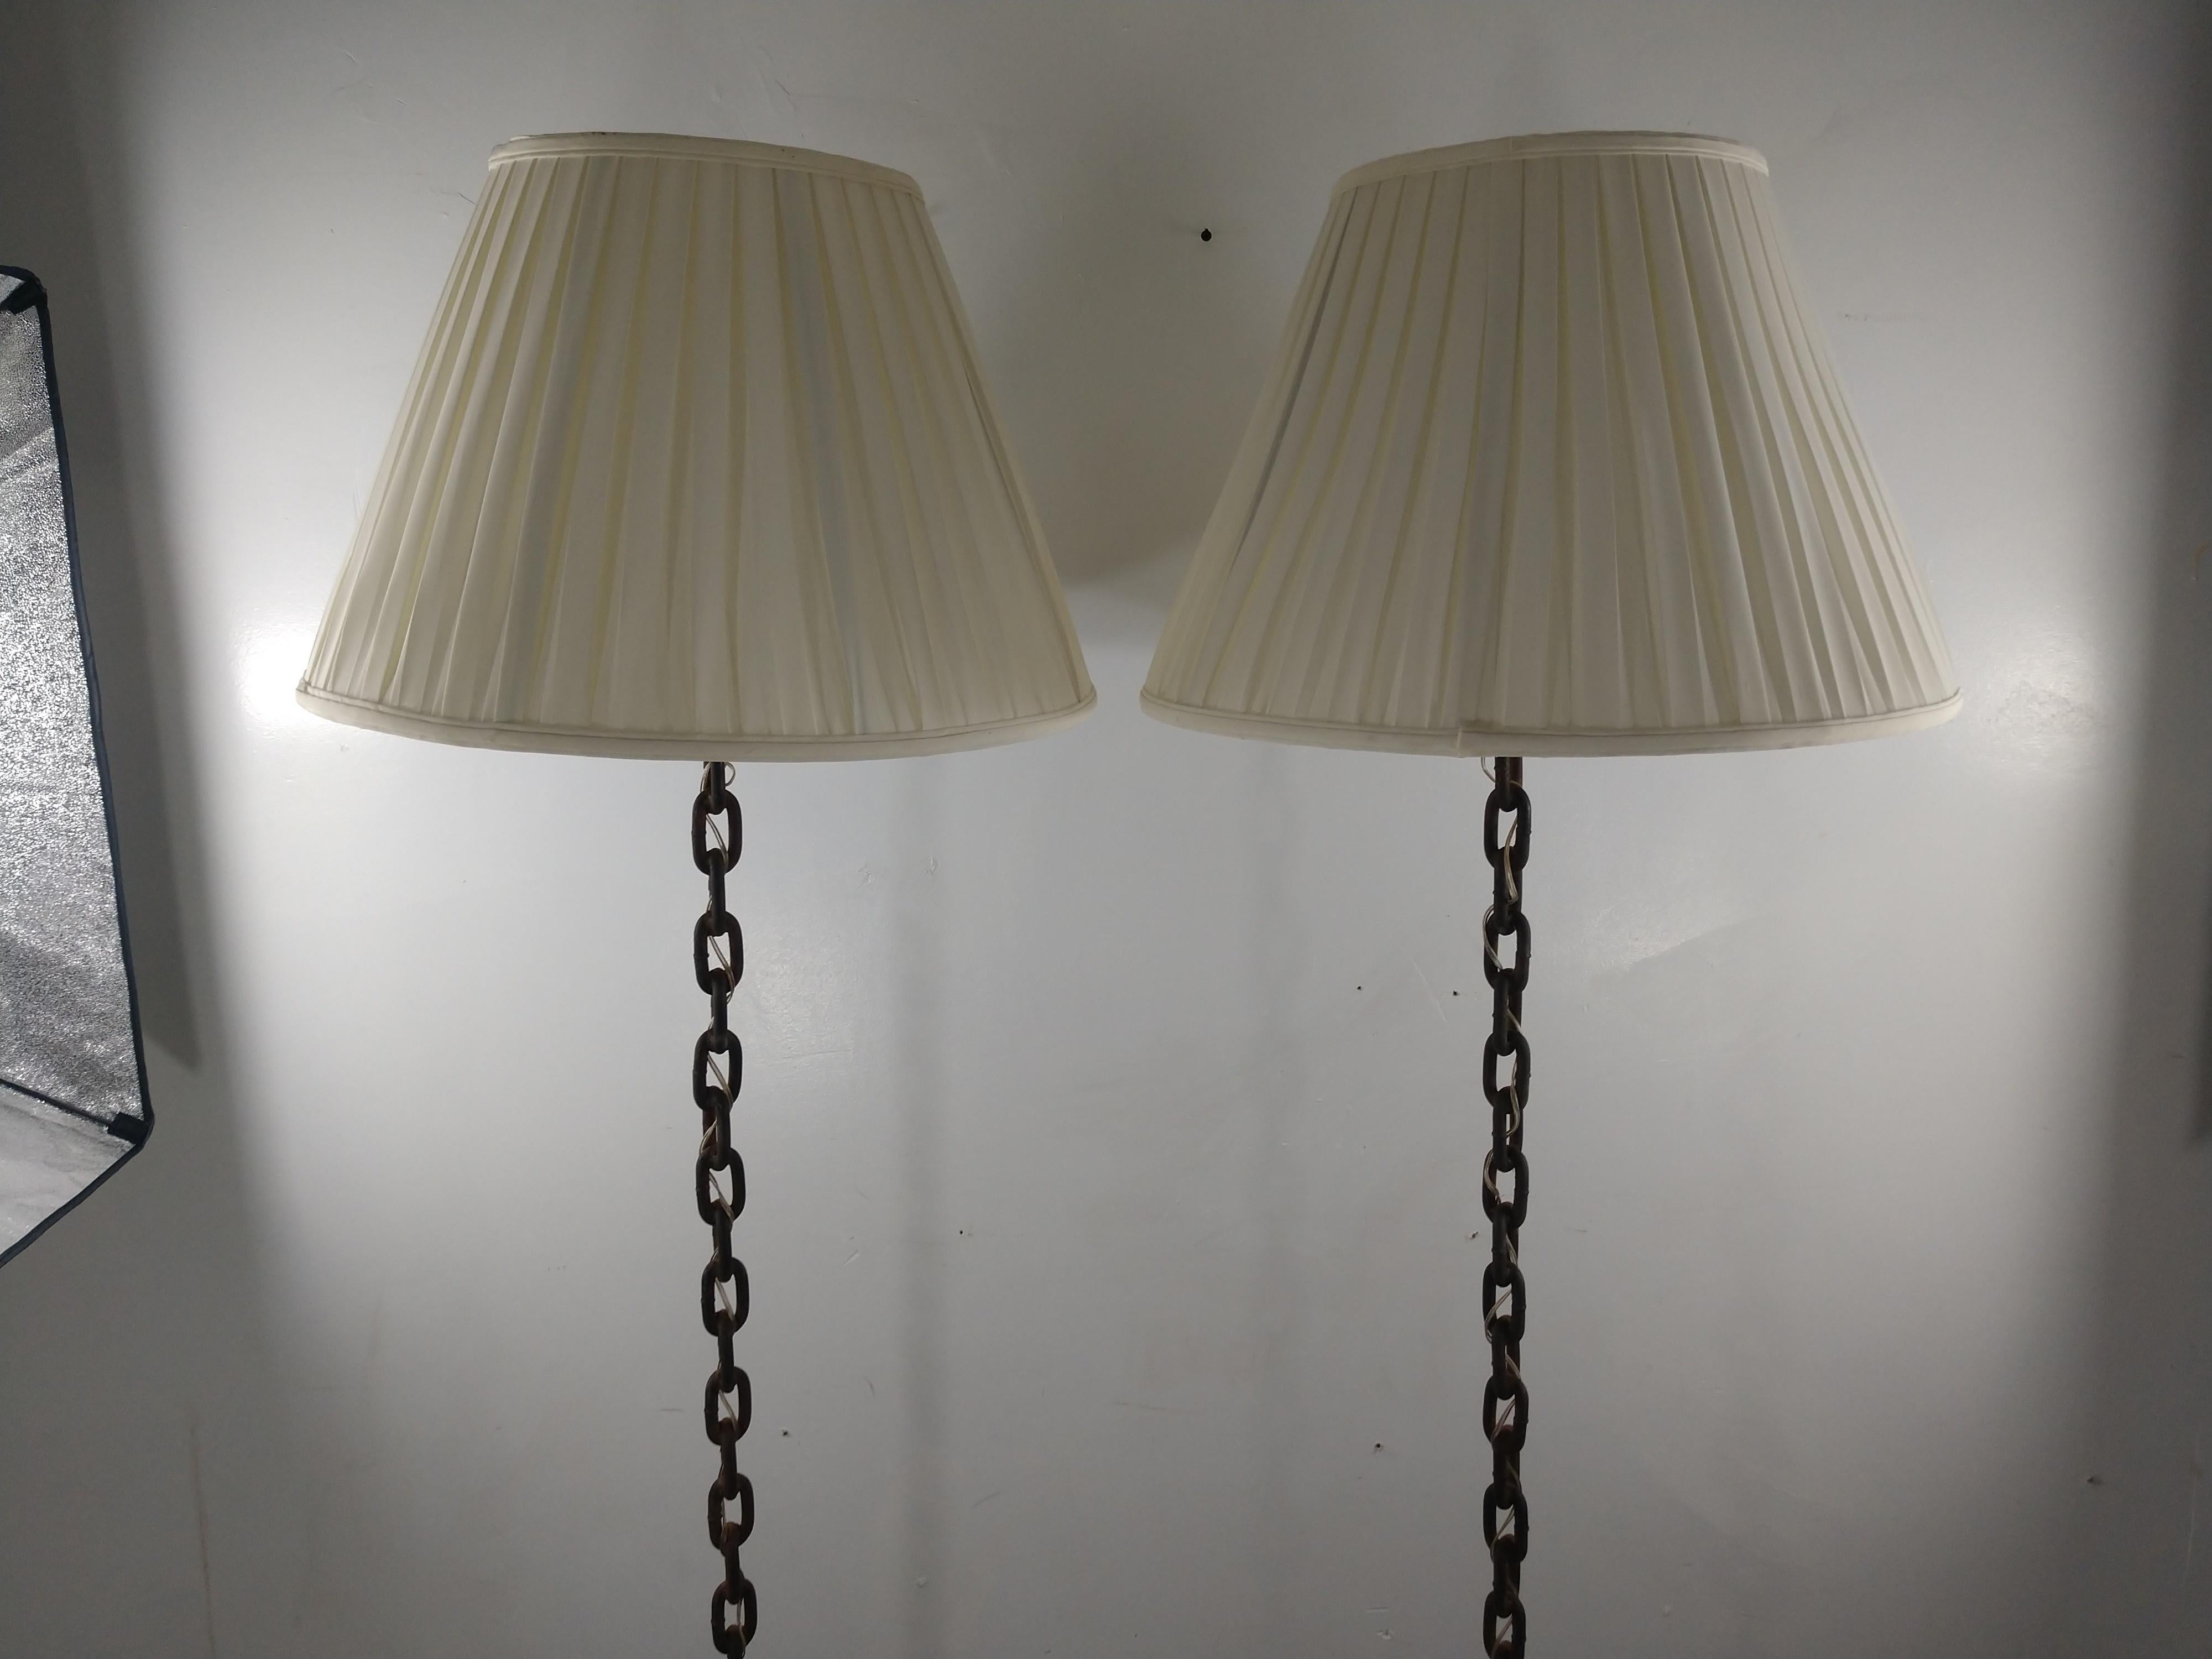 Welded Pair of Brutalist French Iron Chain Rope Floor Lamps Midcentury